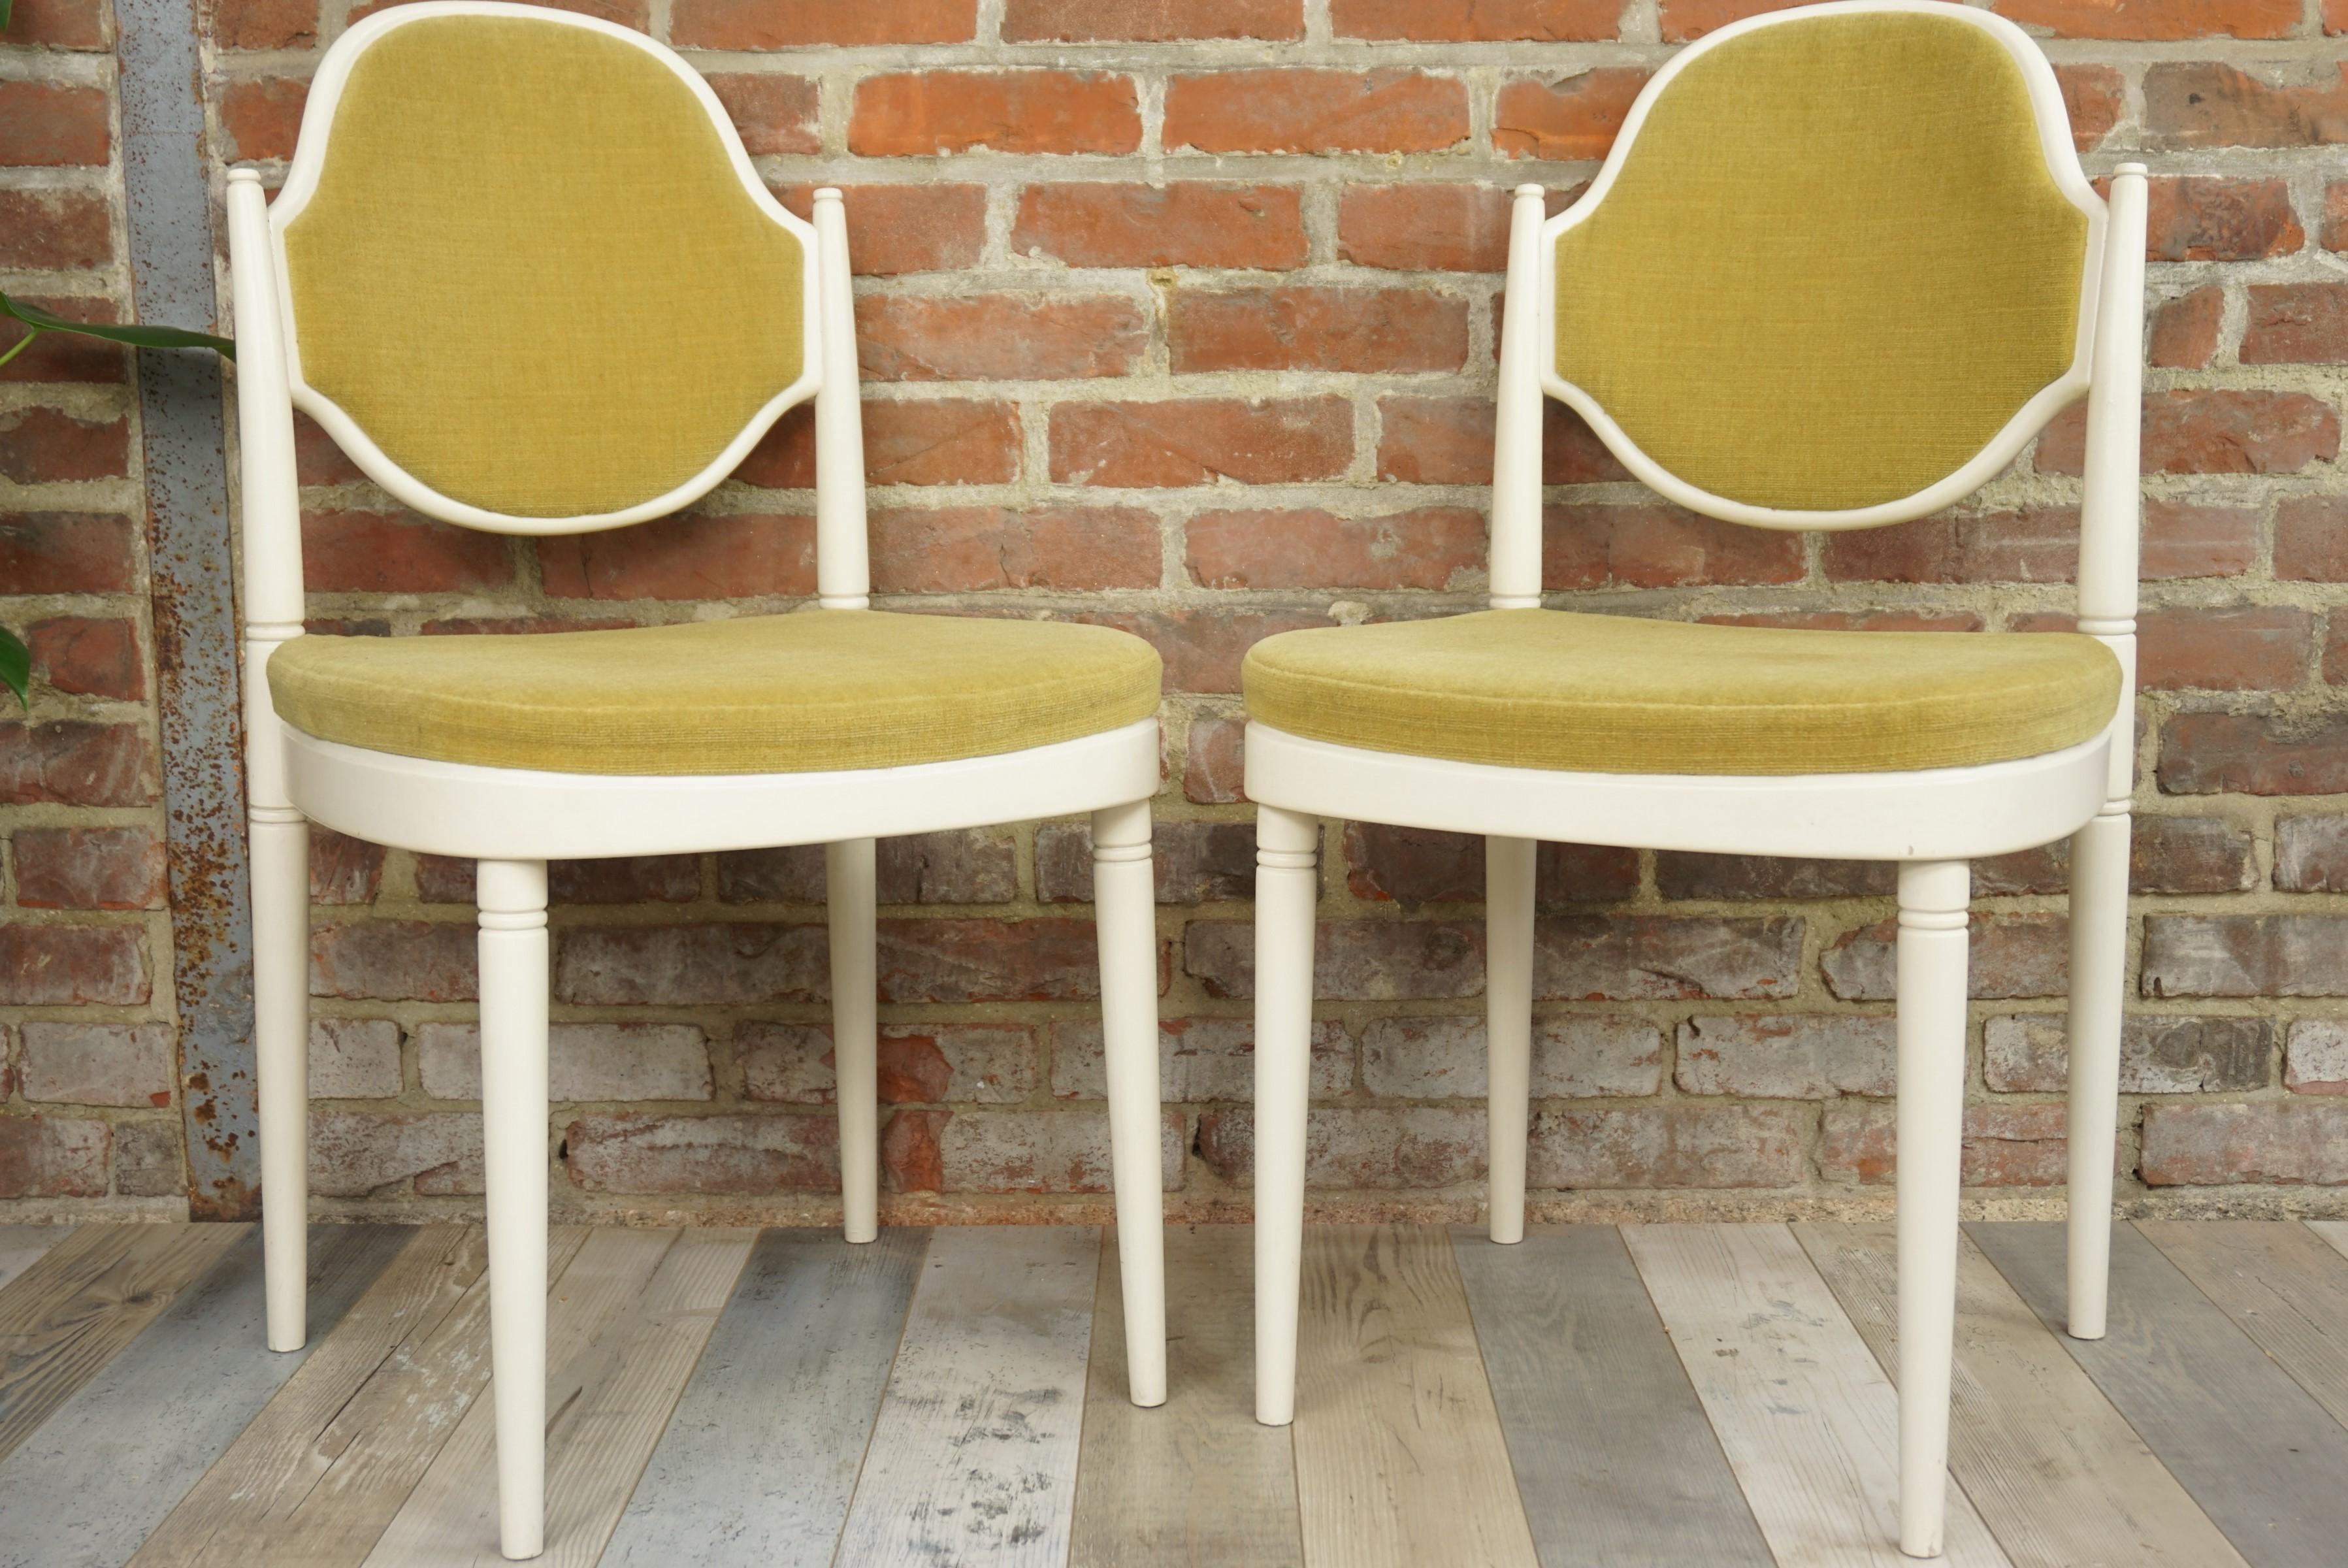 Rare pair of Thonet chairs design by Hanno Von Gustedt between the 1960s and 1970s.

The Famous House, of international fame, was founded in 1819 by Mickael Thonet. In 1859 he industrialized for the first time the manufacture of furniture by